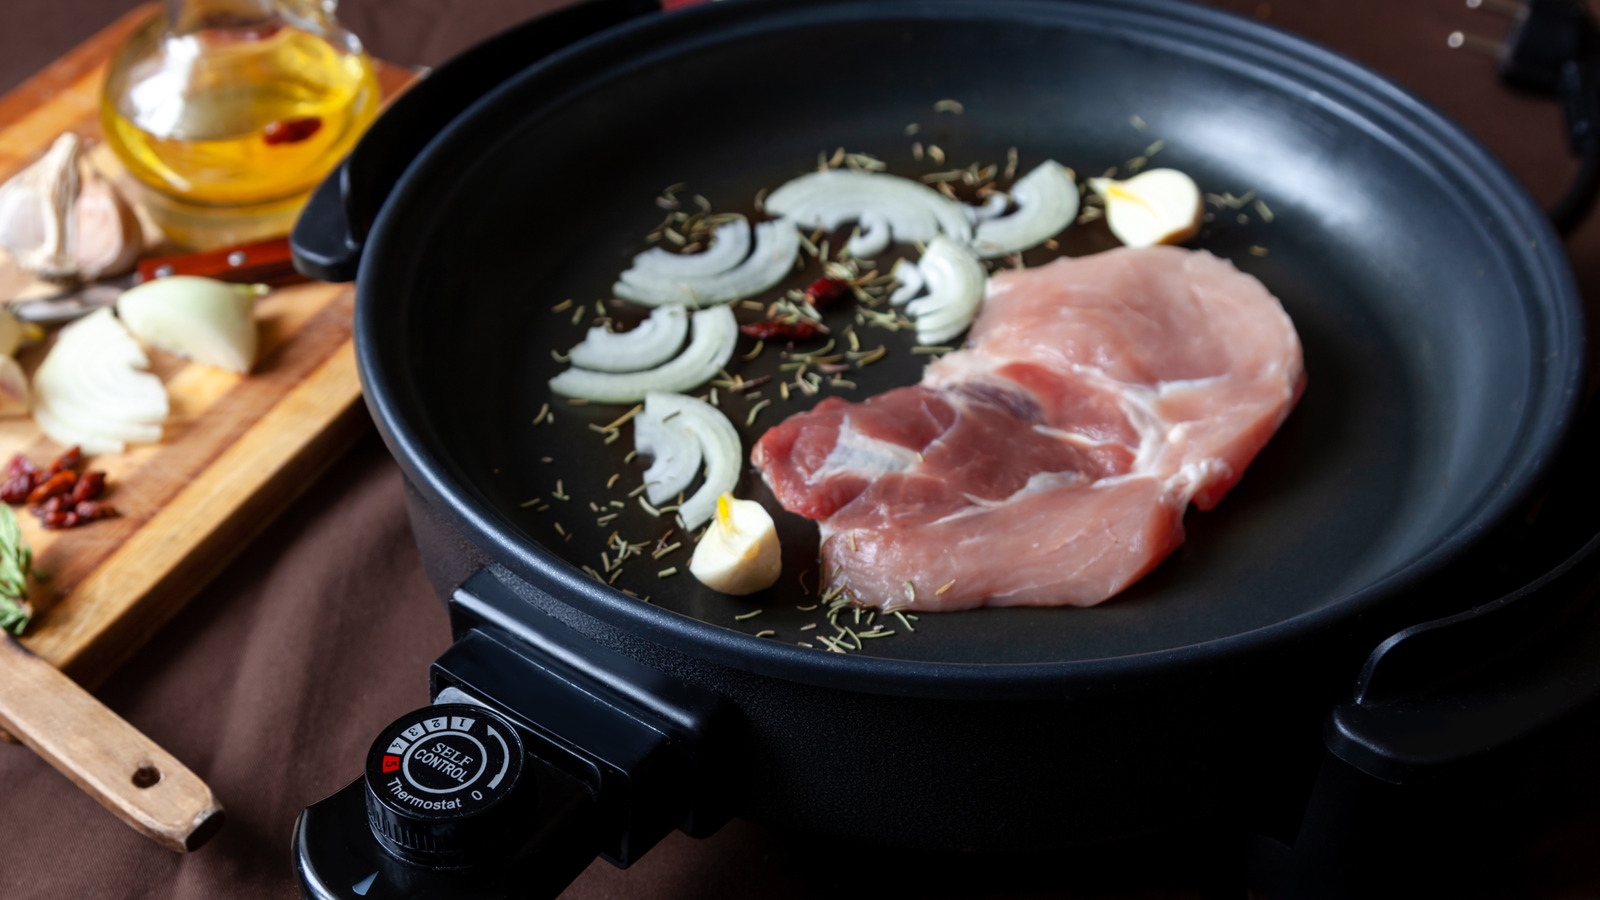 The 12 Absolute Best Uses For Your Electric Frying Pan